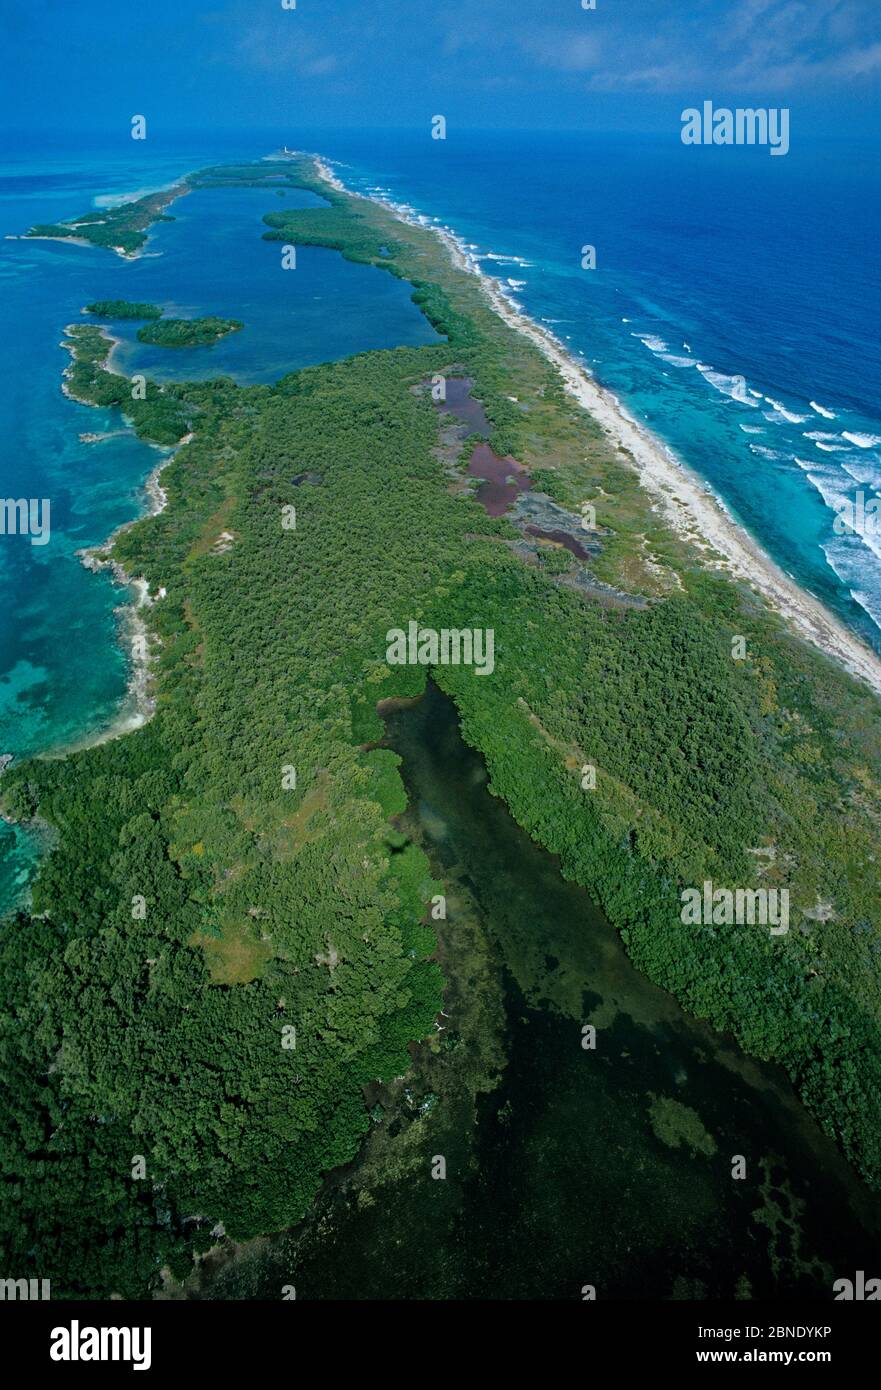 Aerial view of Red mangrove (Rhizophora mangle) forest, Contoy Island National Park, Mesoamerican Reef System, near Cancun, Caribbean Sea, Mexico, Jan Stock Photo